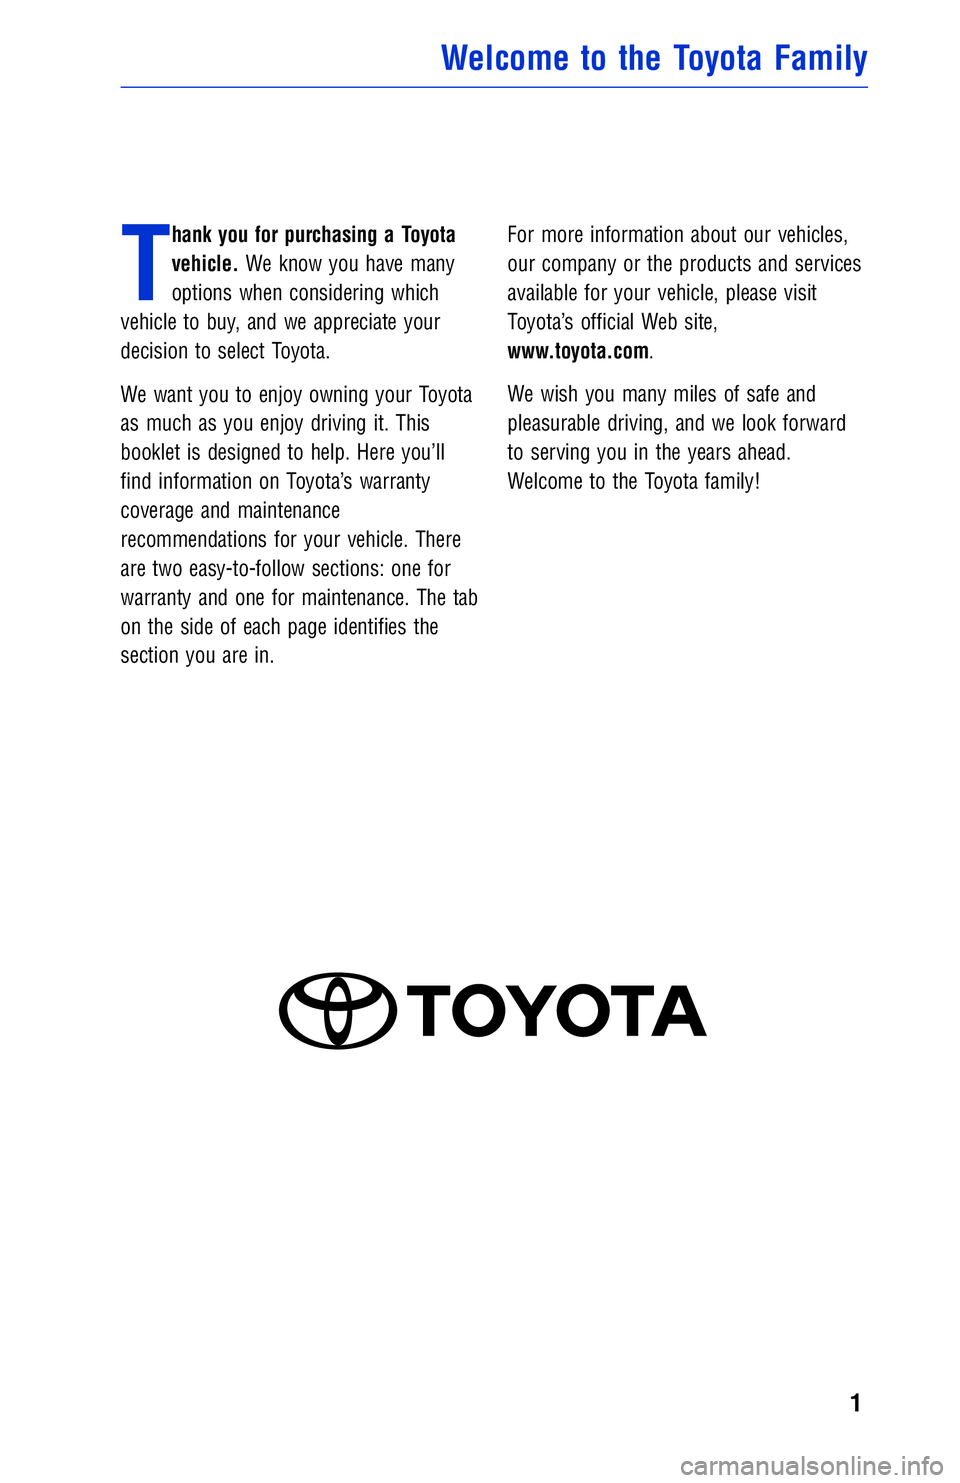 TOYOTA CAMRY 2018  Warranties & Maintenance Guides (in English) JOBNAME: 2877965-en-2018_CAMR PAGE: 1 SESS: 4 OUTPUT: Mon Jan 16 13:30:53 2017
/InfoShareAuthorCODA/InfoShareAuthorCODA/TS_Warr_Maint/2877965-en-2018_C\
AMRY.00505-18WMG-CAM_/TS_Warr_Maint_v1
T
hank y